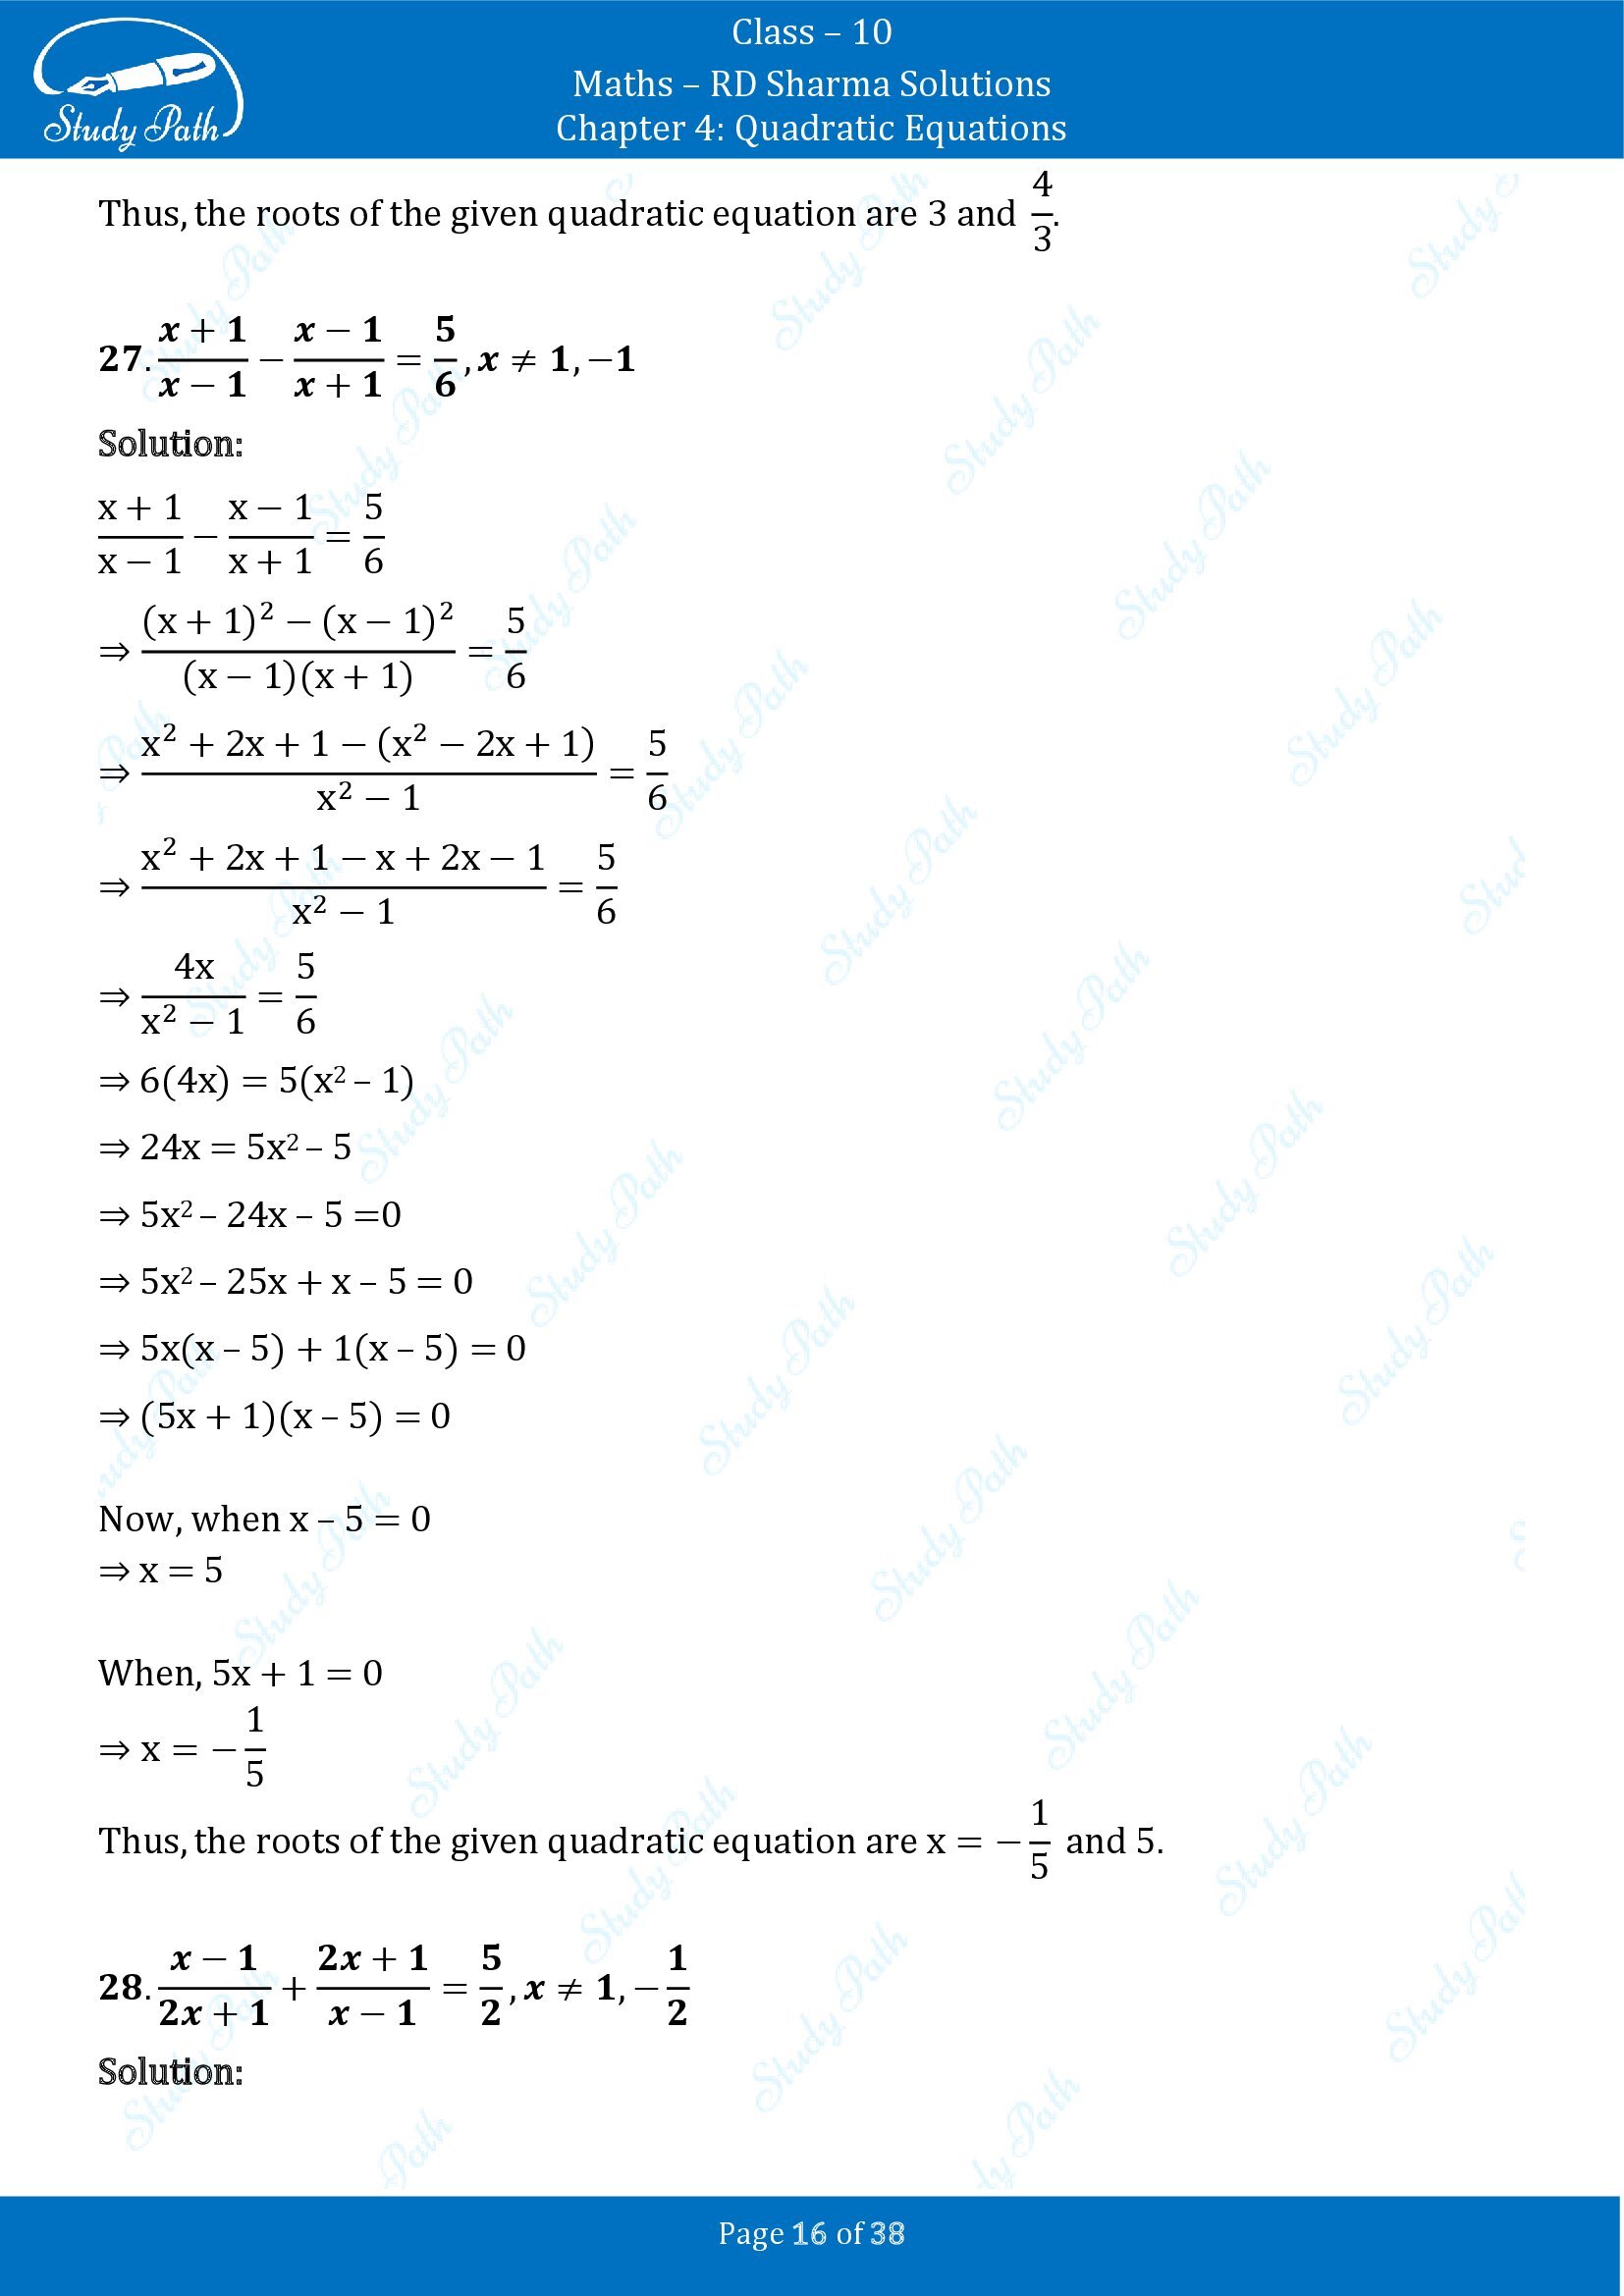 RD Sharma Solutions Class 10 Chapter 4 Quadratic Equations Exercise 4.3 00016